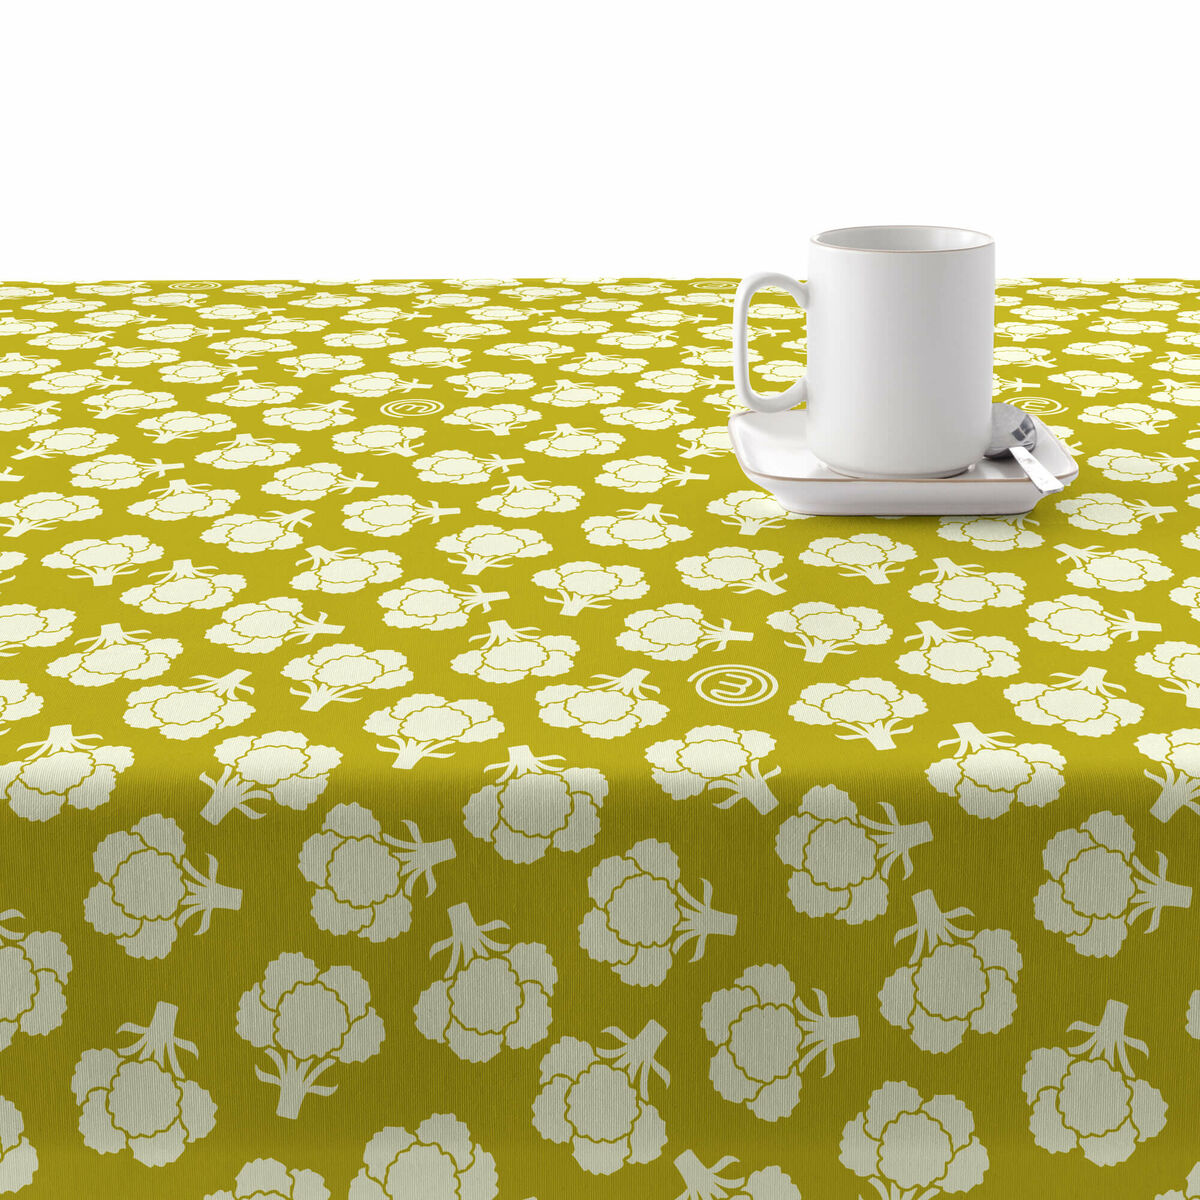 Stain-proof tablecloth Belum 0400-70 300 x 140 cm